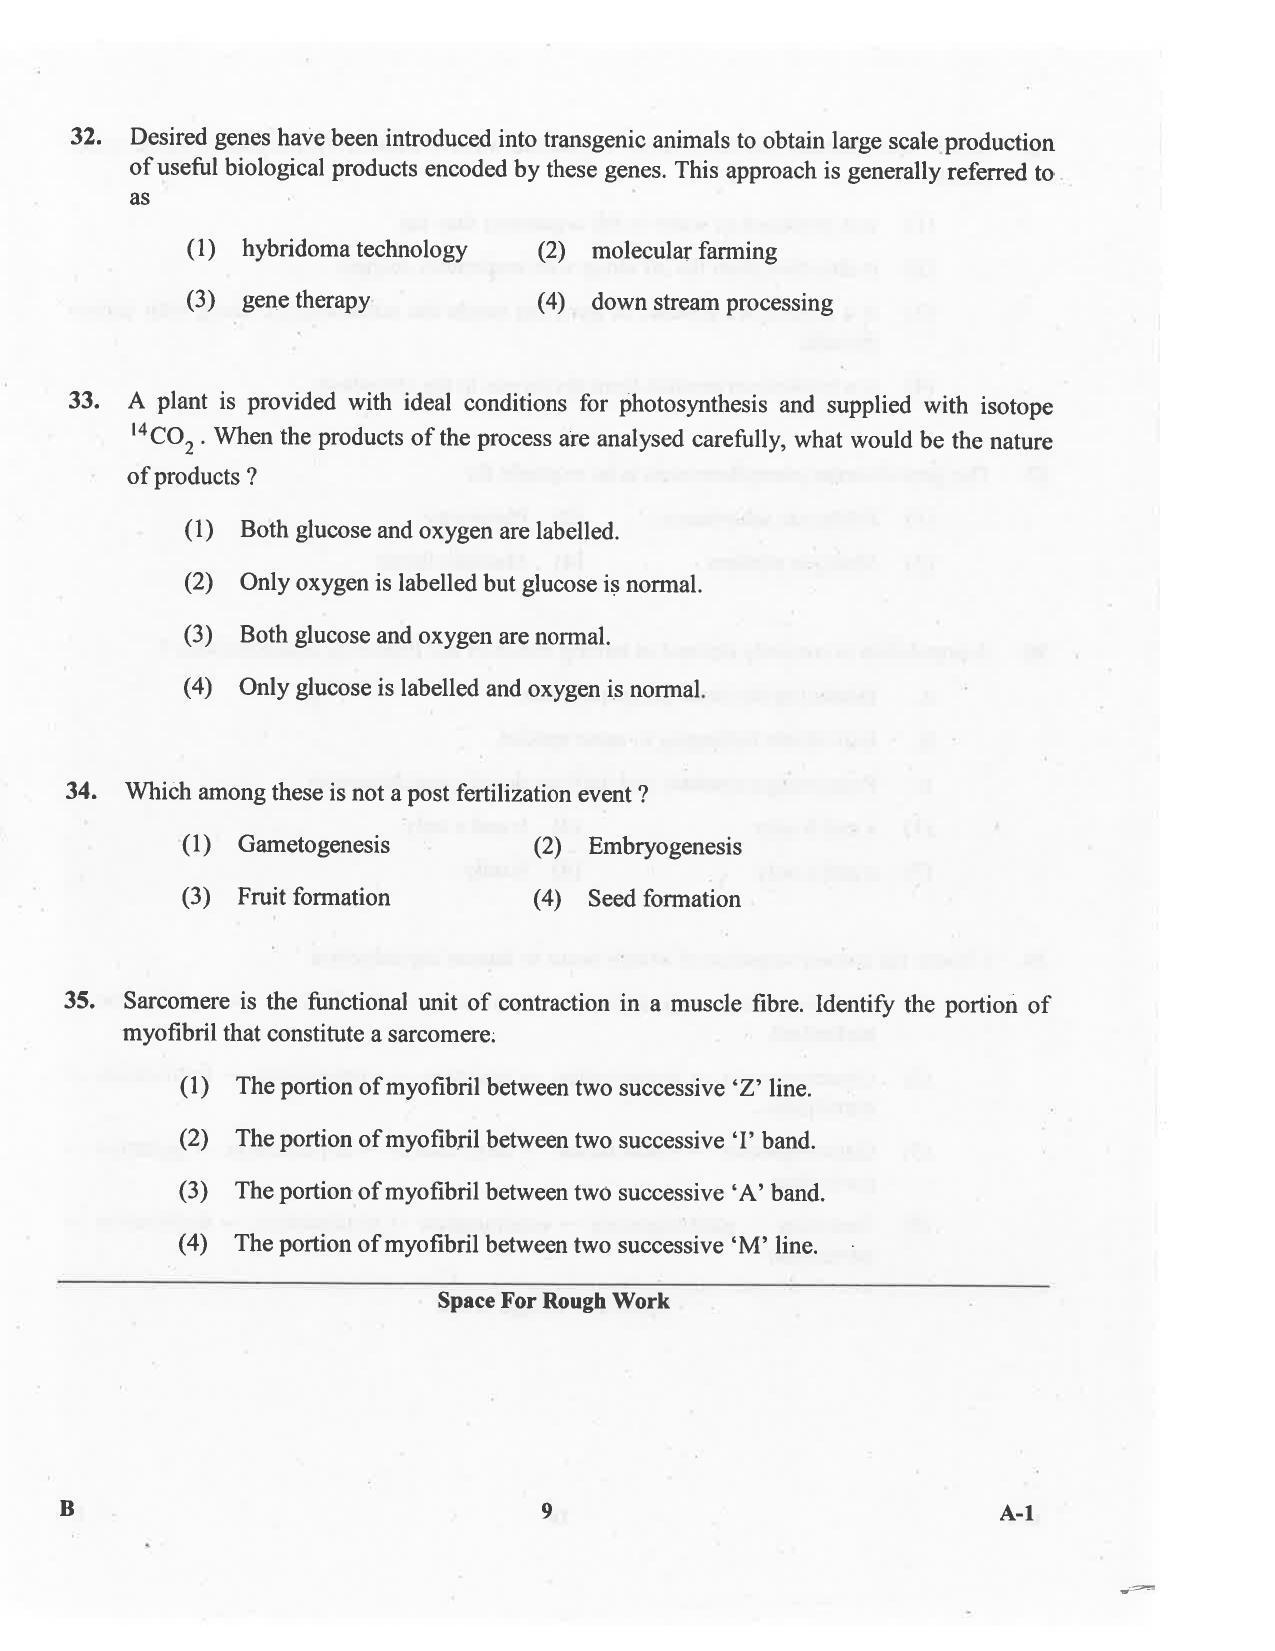 KCET Biology 2016 Question Papers - Page 9